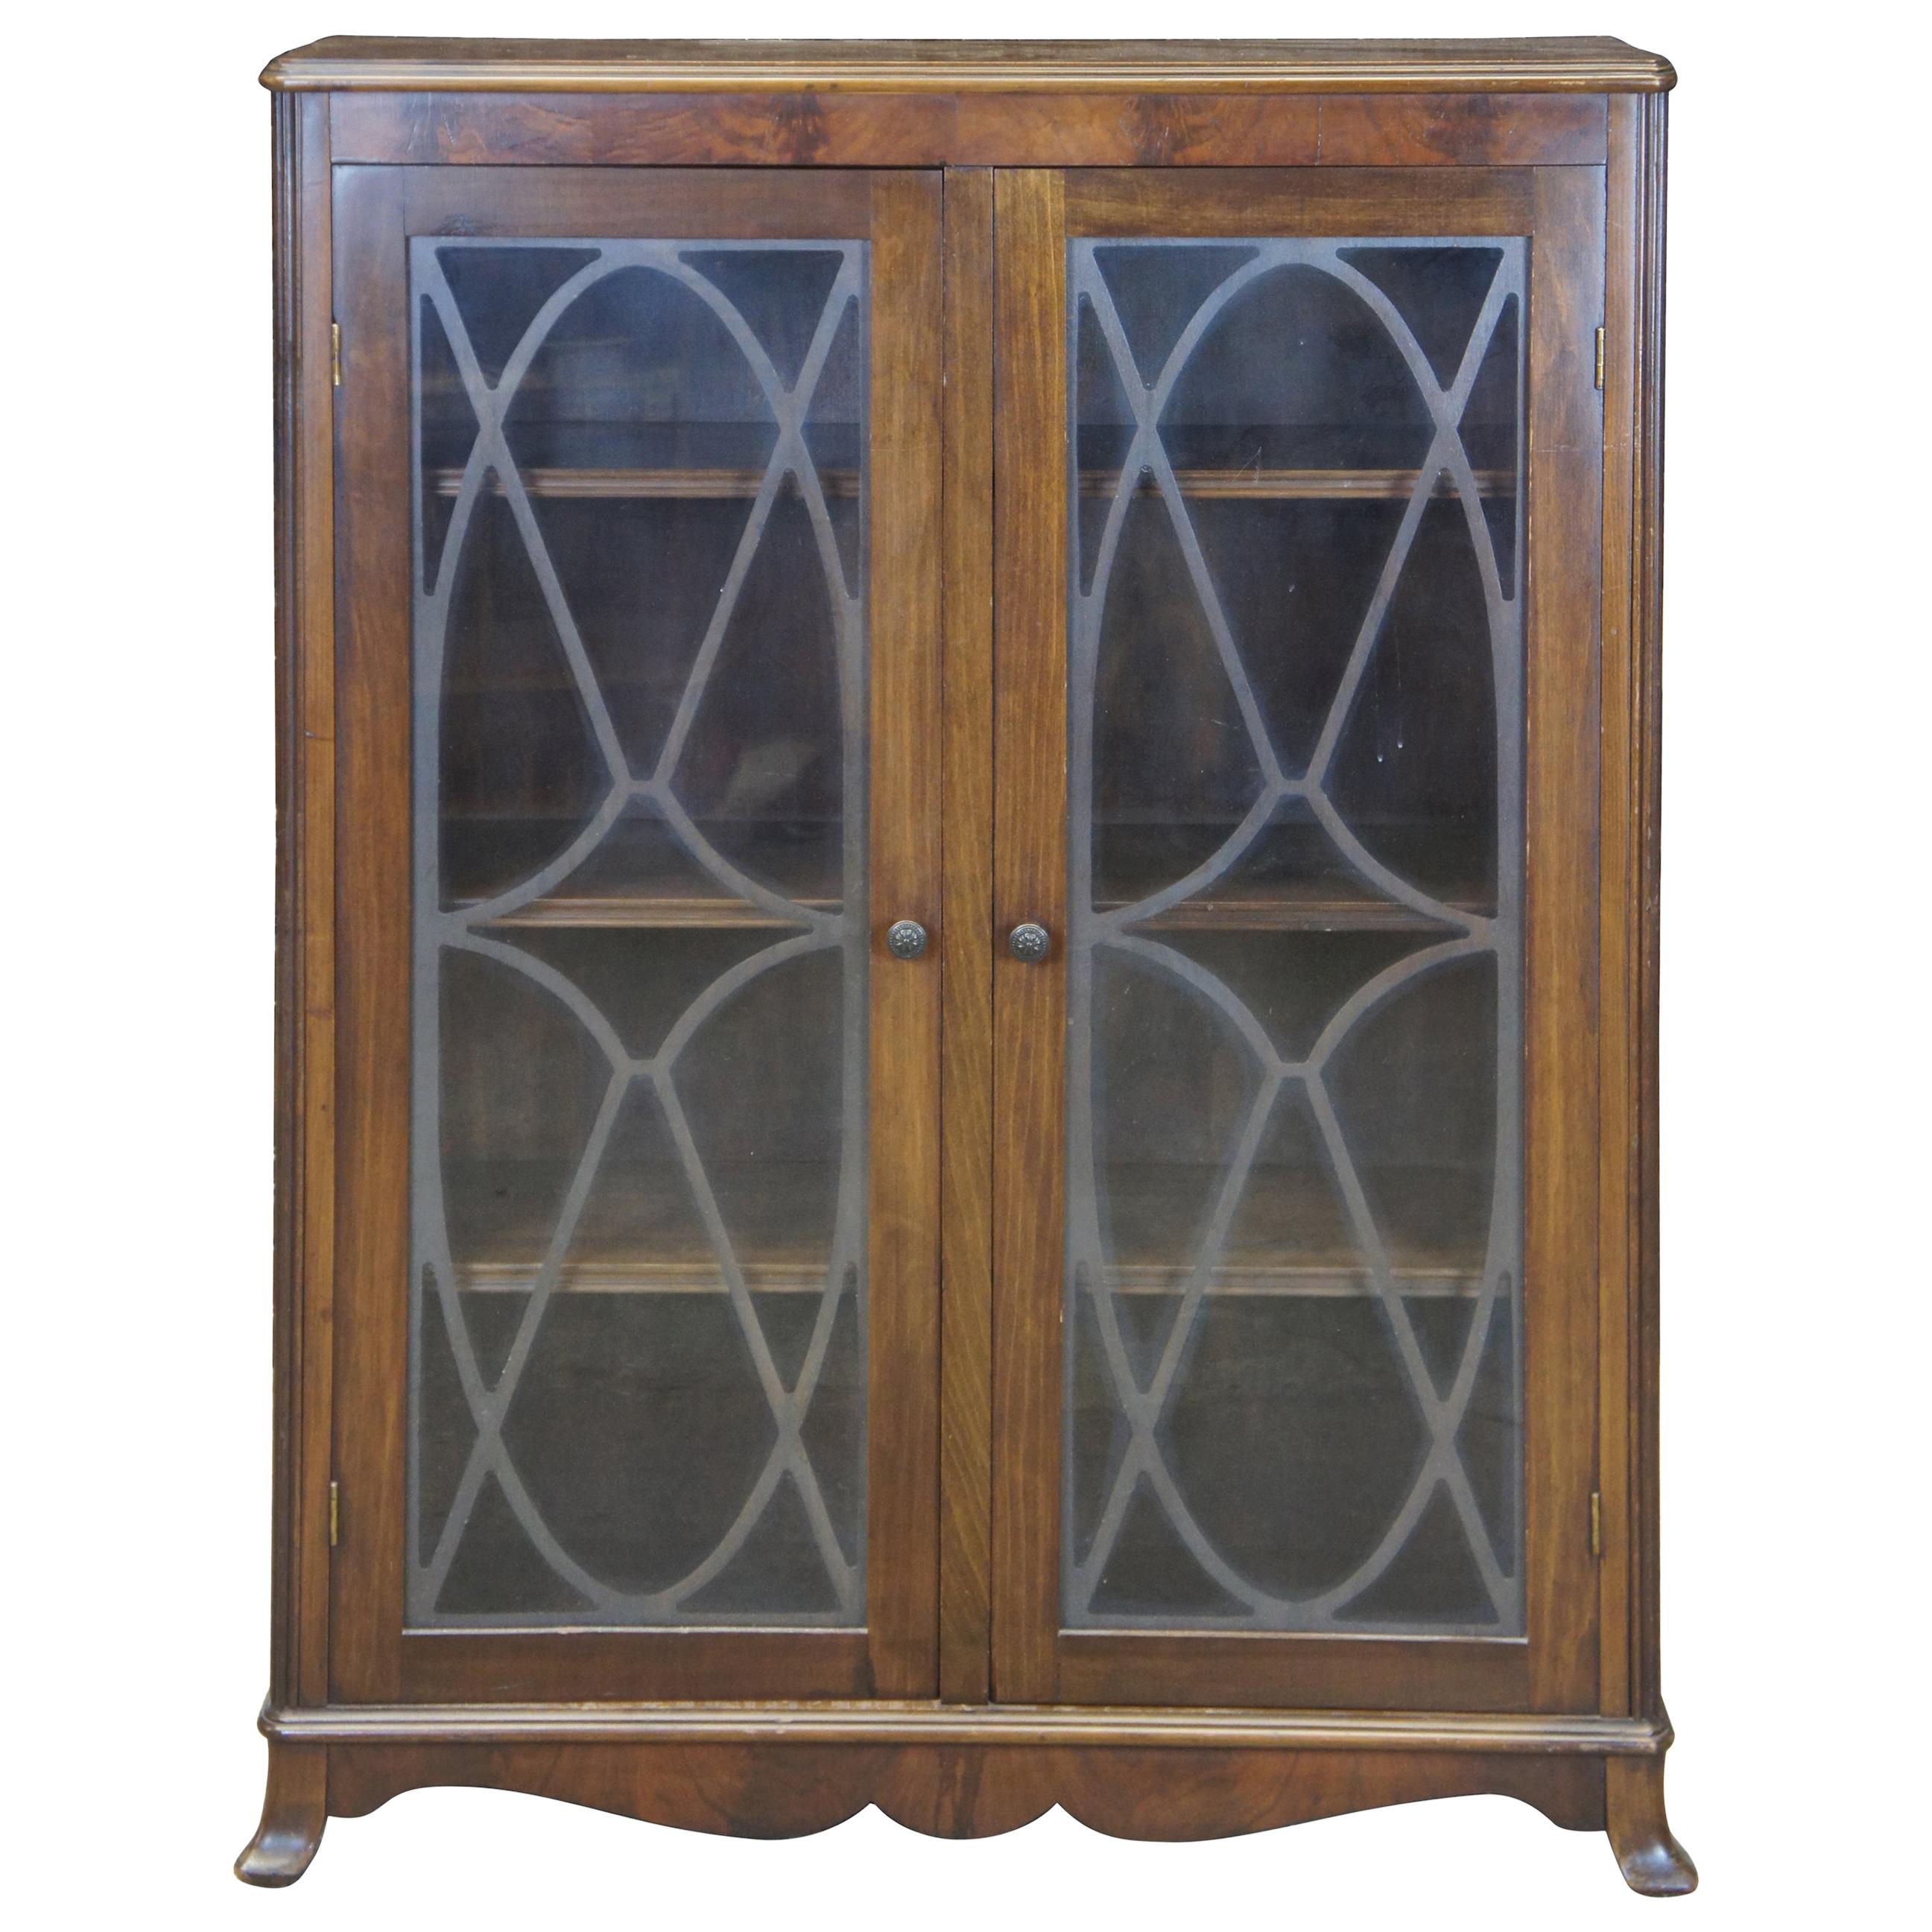 Early 20th Century Georgian Style Walnut Library Bookcase Display Cabinet